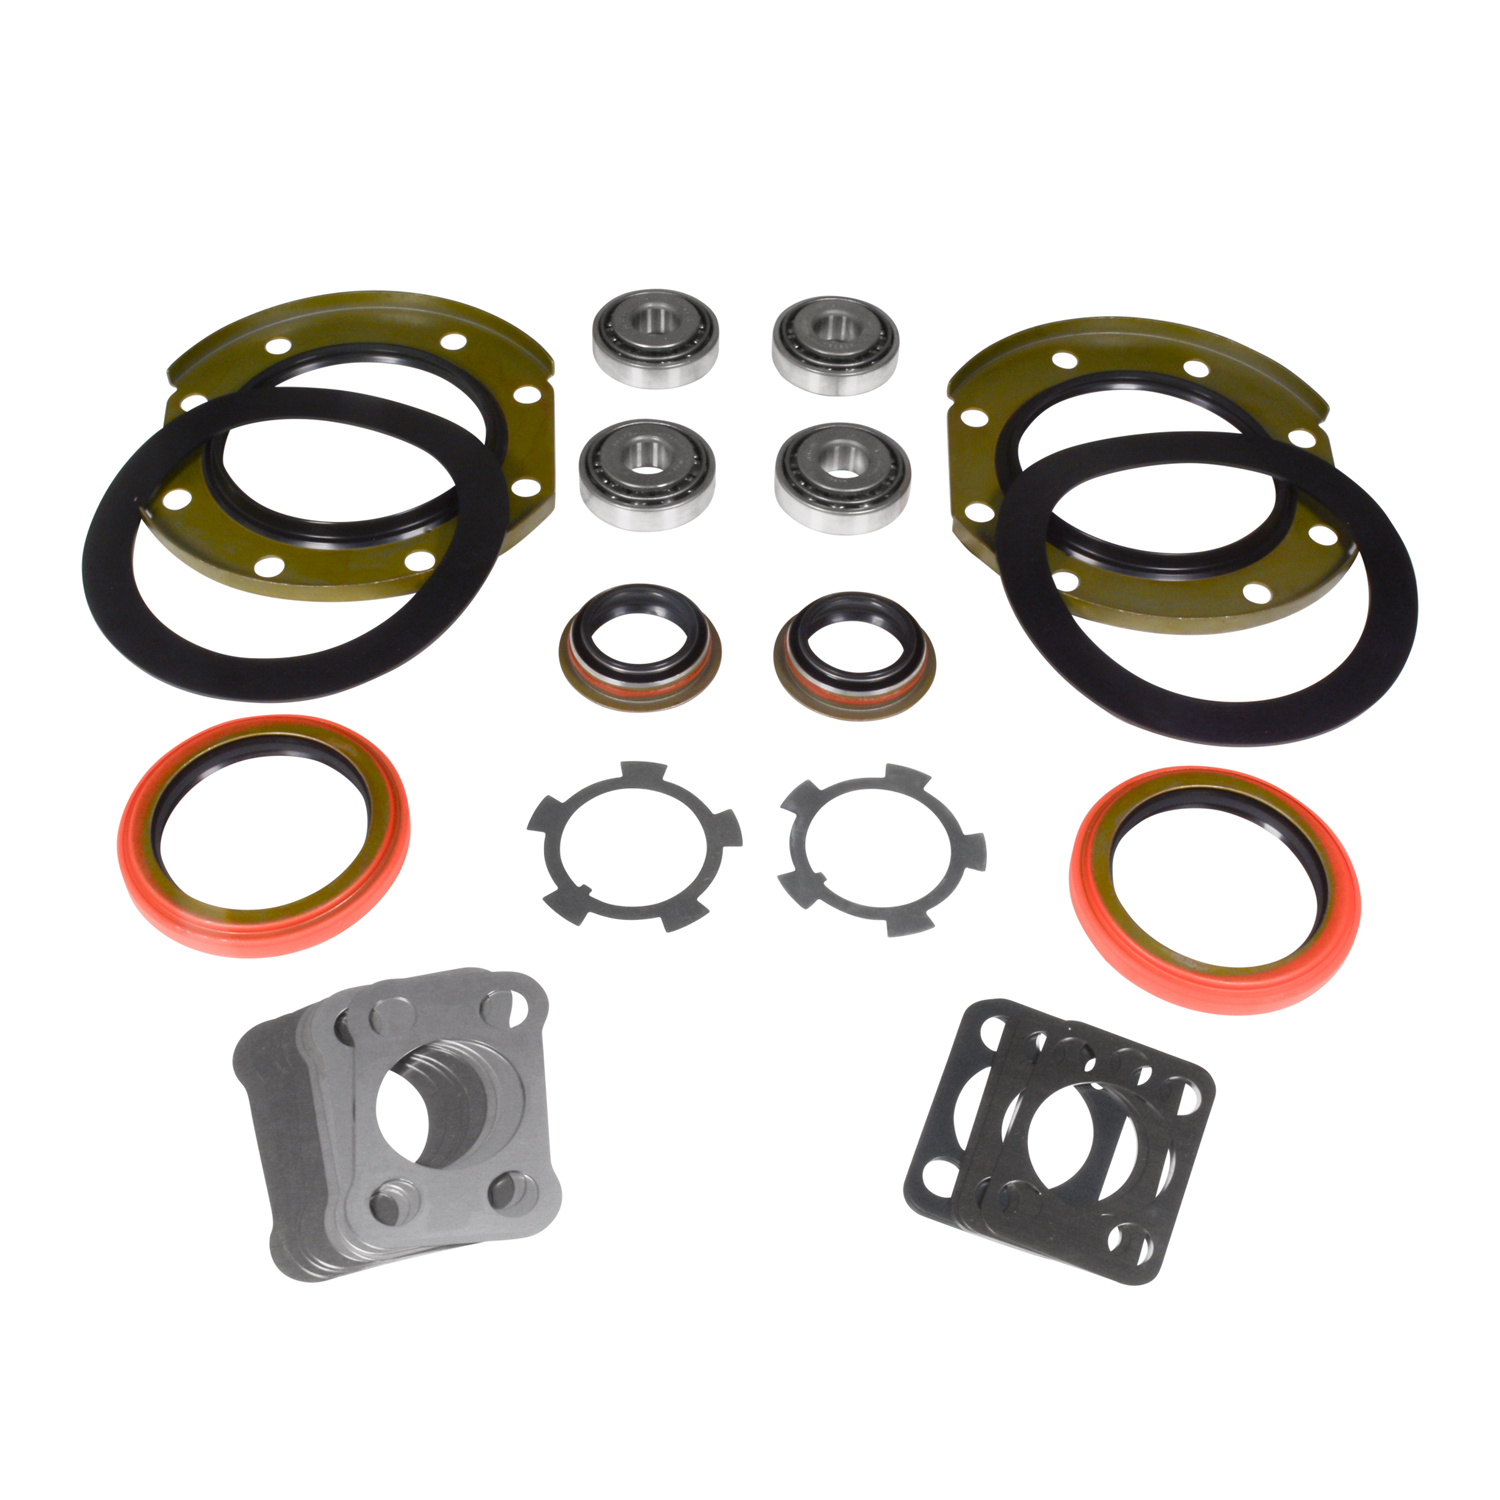 Toyota '79-'85 Hilux and '75-'90 Landcruiser Knuckle kit 